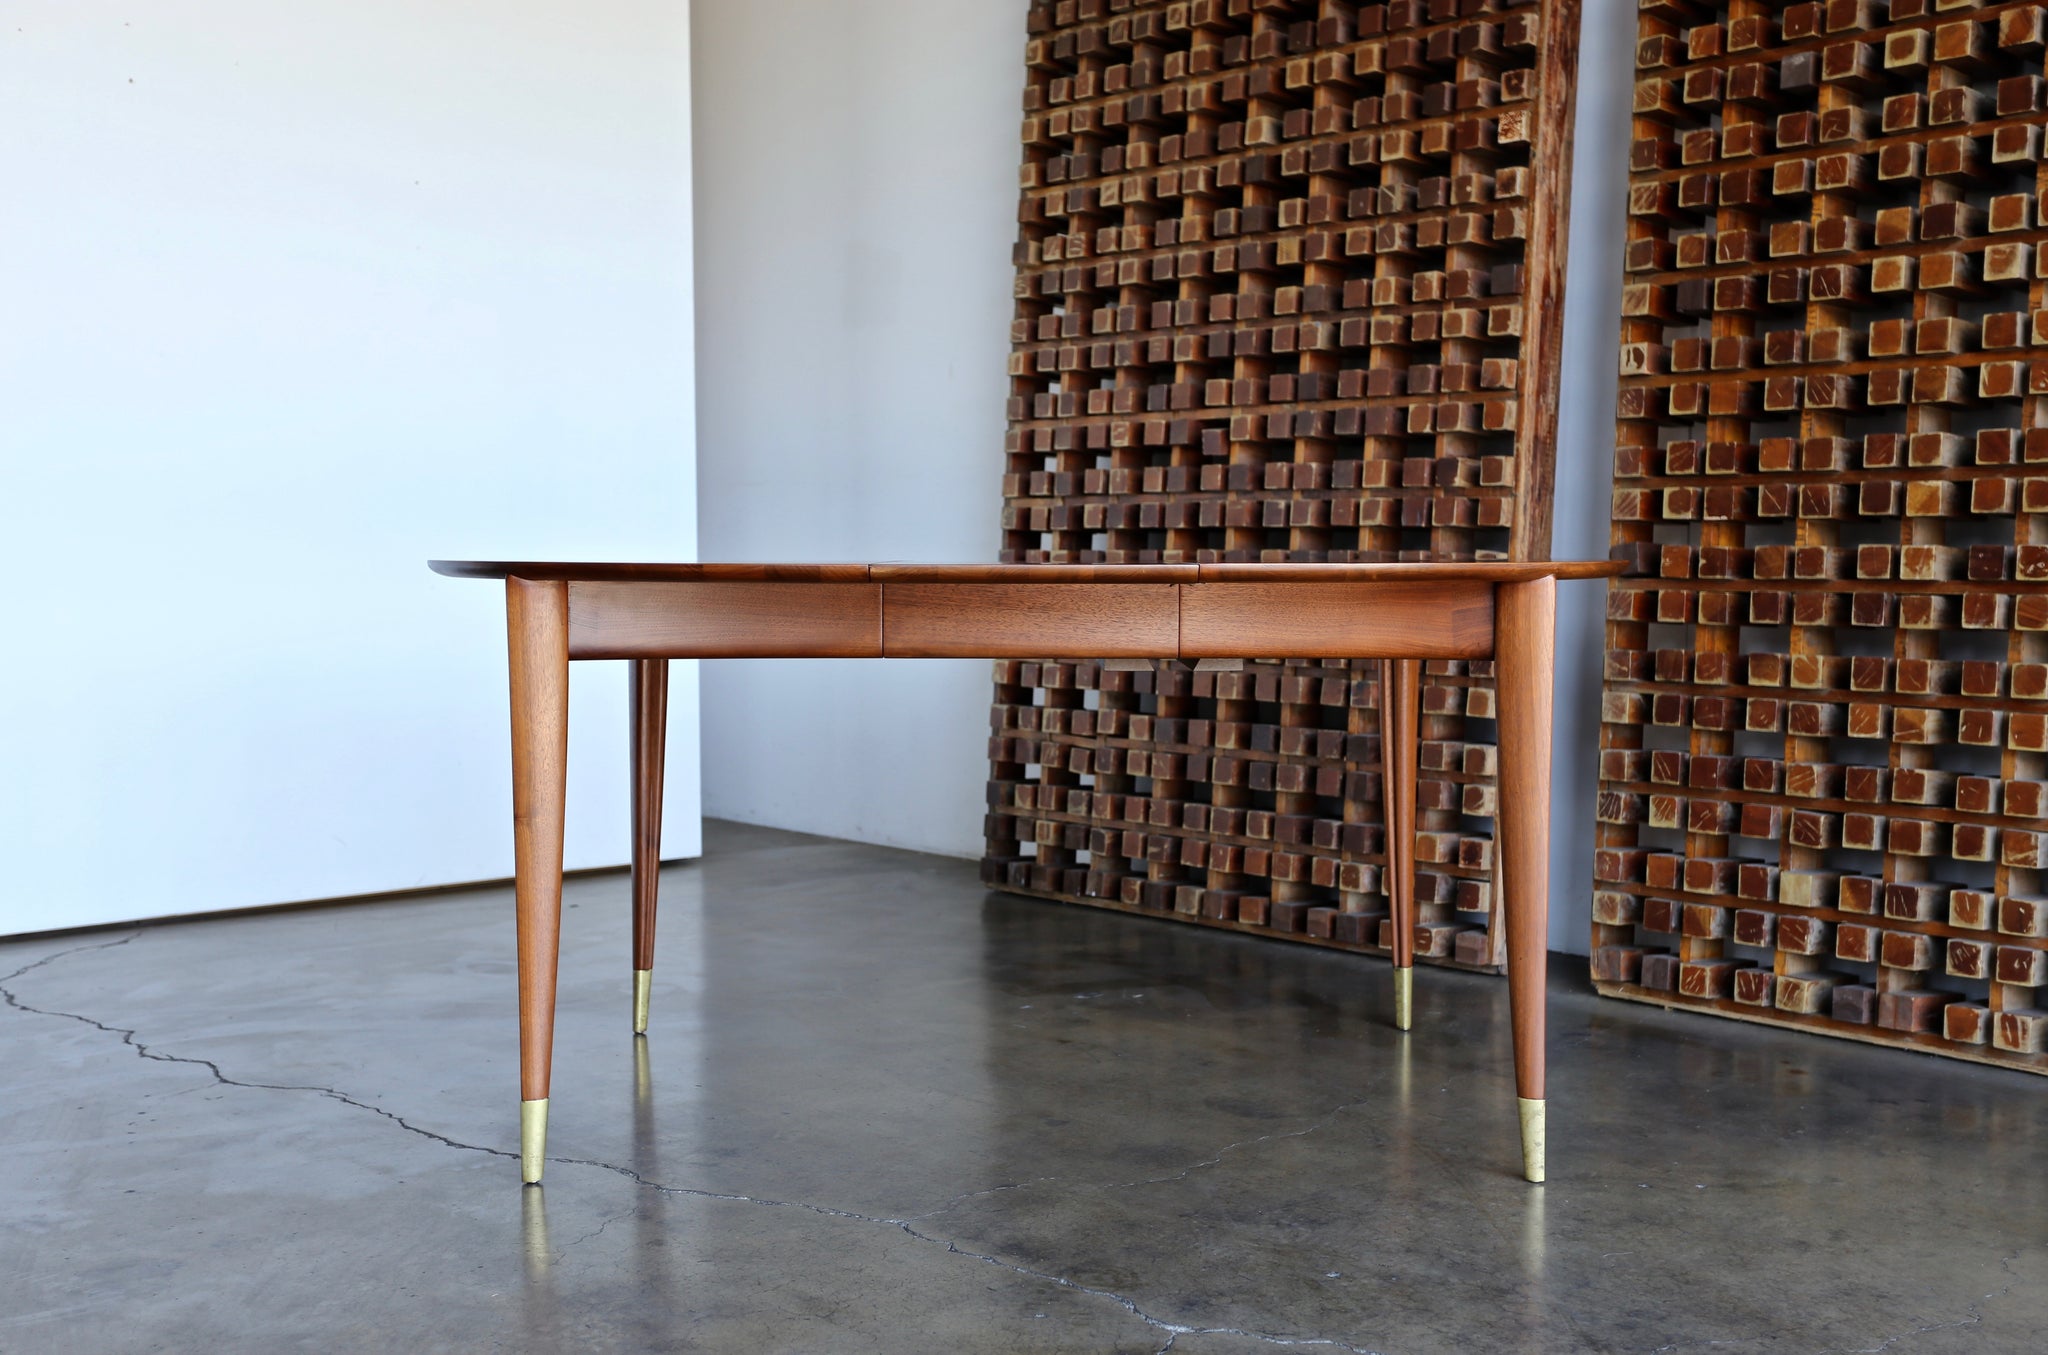 = SOLD = Gio Ponti Dining Table for M. Singer & Sons, circa 1955